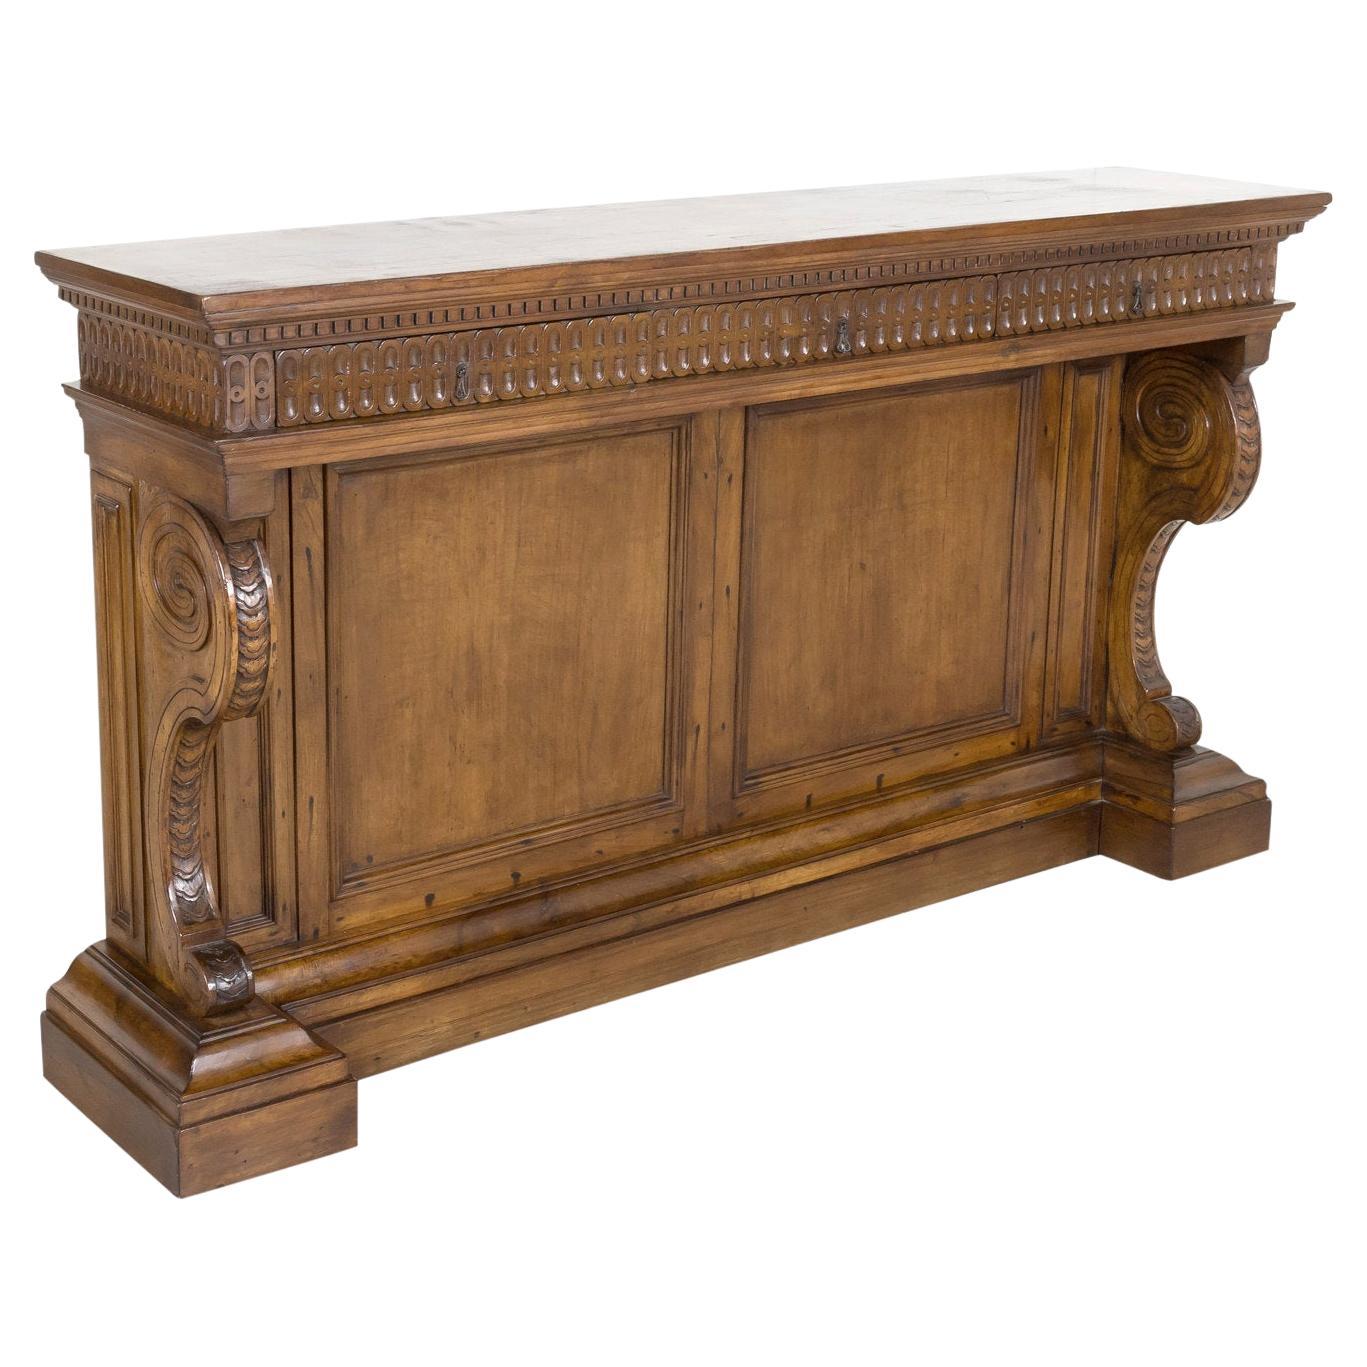 19th Century, Spanish Renaissance Style Carved Walnut Wall Console with Drawers For Sale